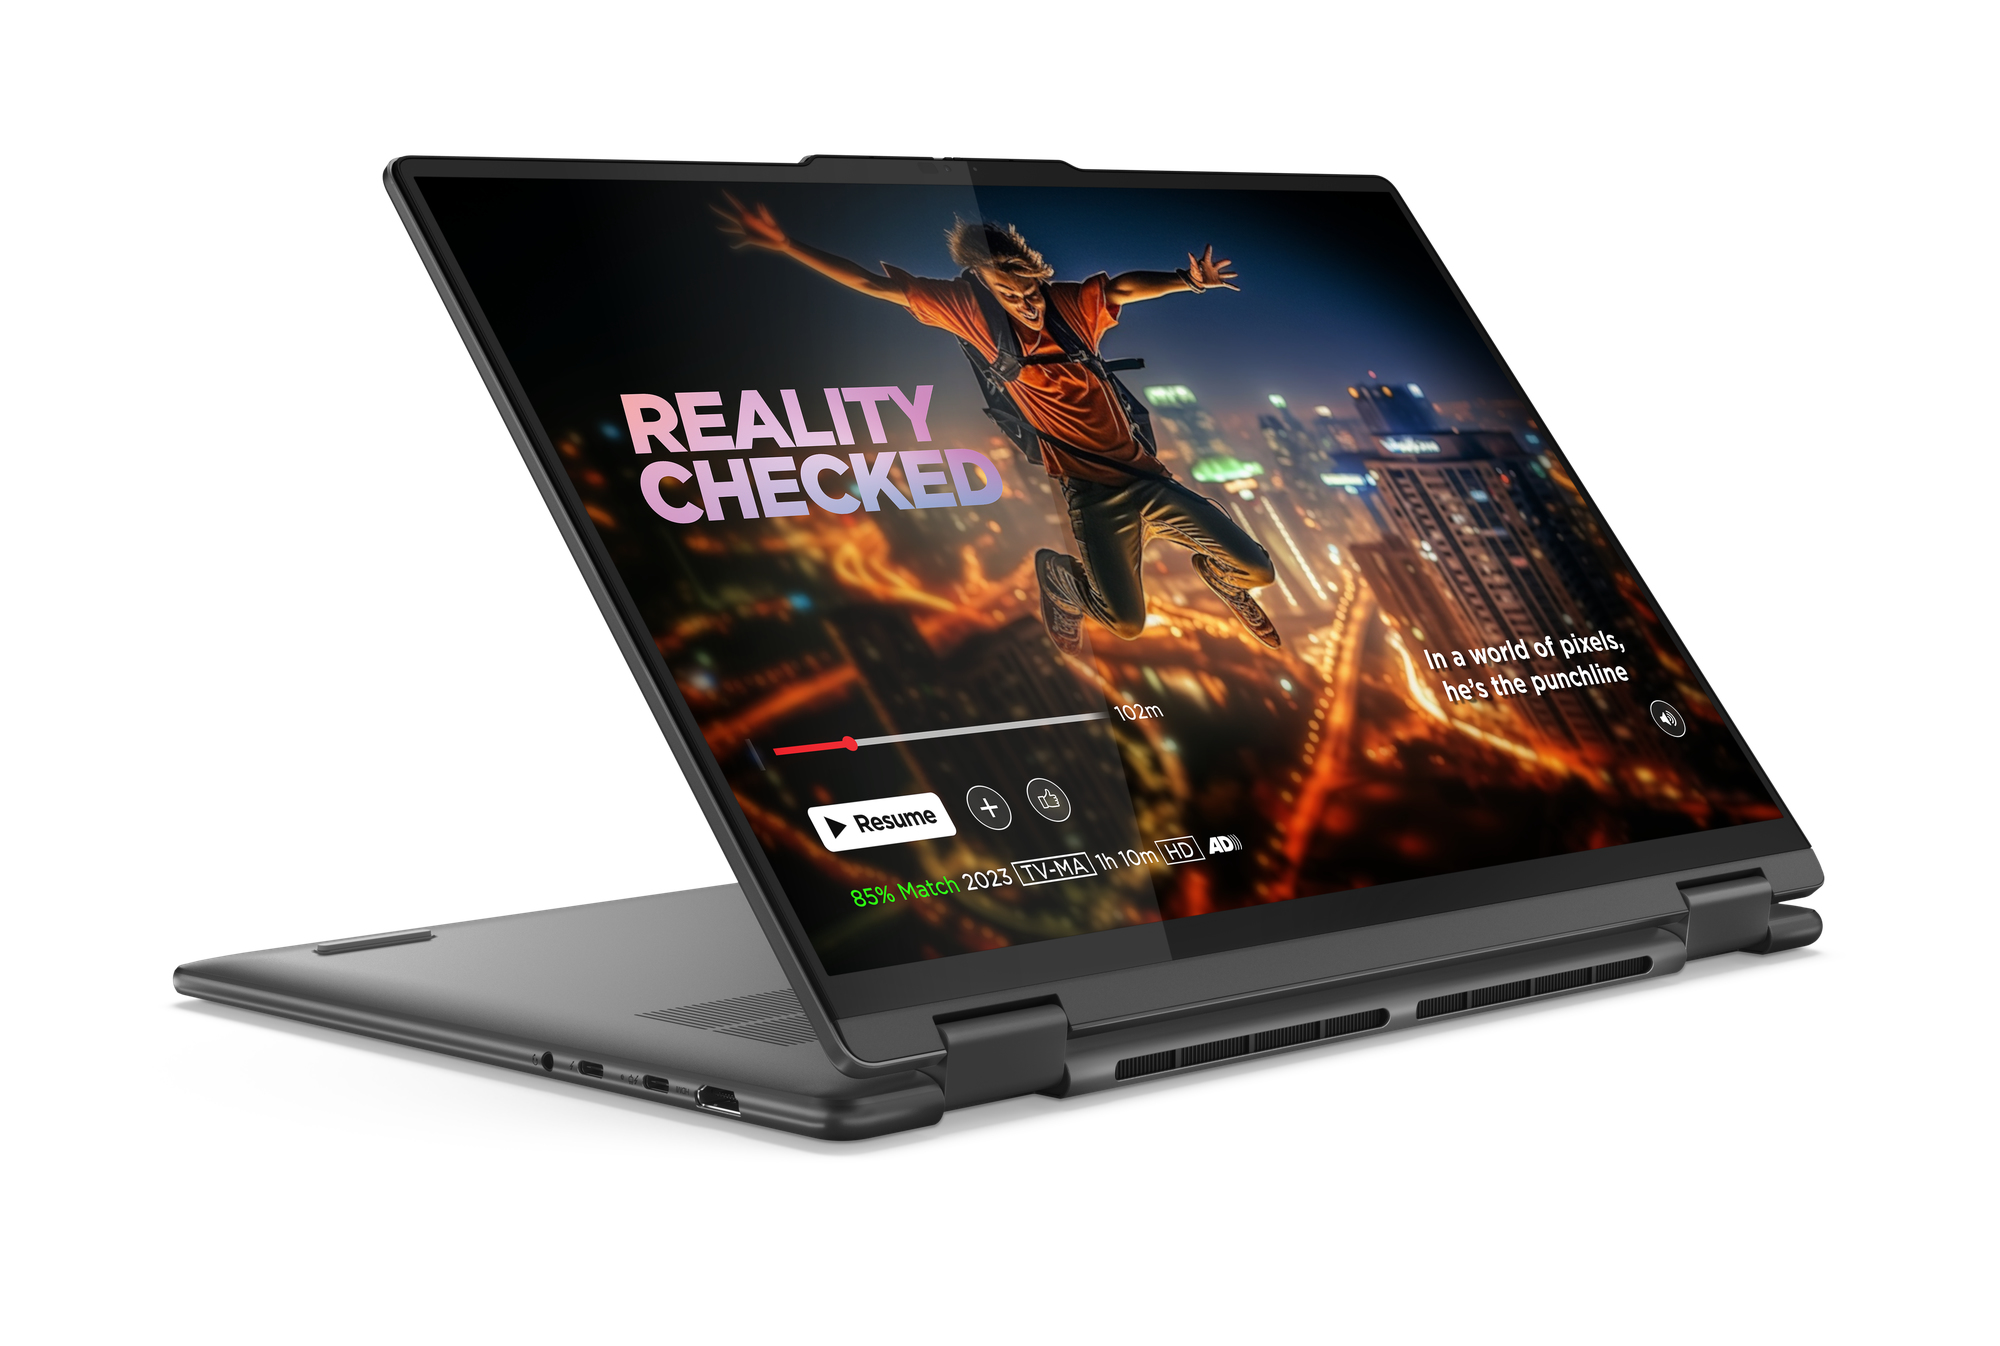 Yoga 7i 2-in-1 Gen 9: Lenovo confirms pricing and availability for Intel  Meteor Lake refresh -  News